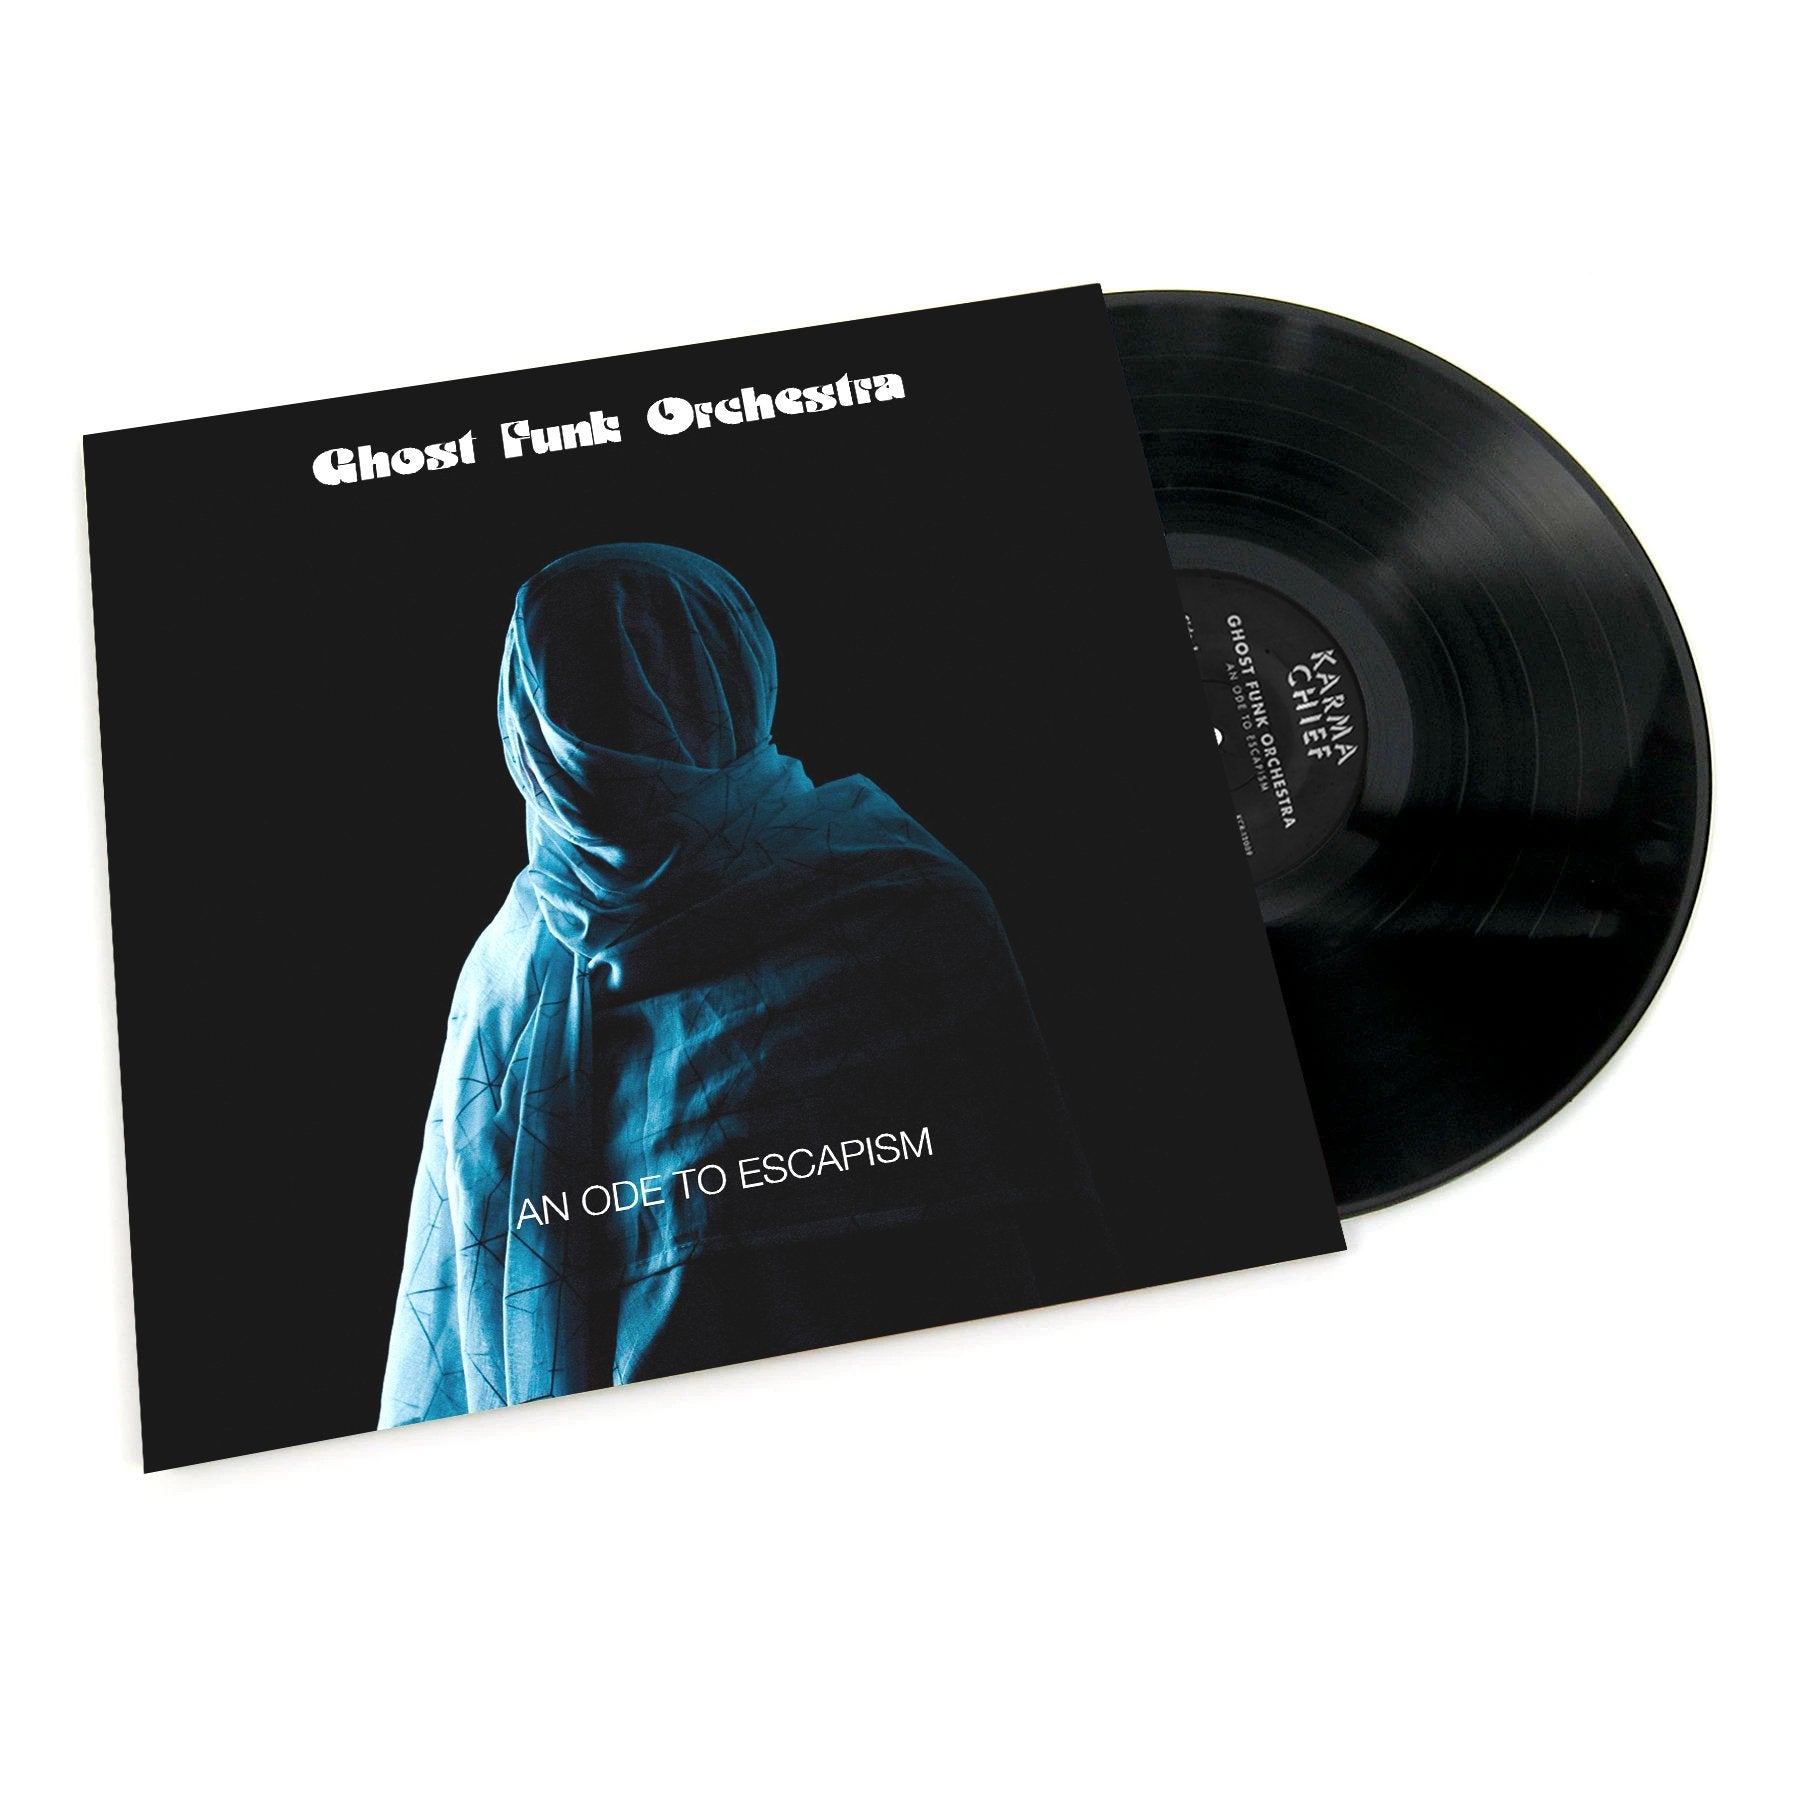 Ghost Funk Orchestra - An Ode To Escapism [Black Vinyl]